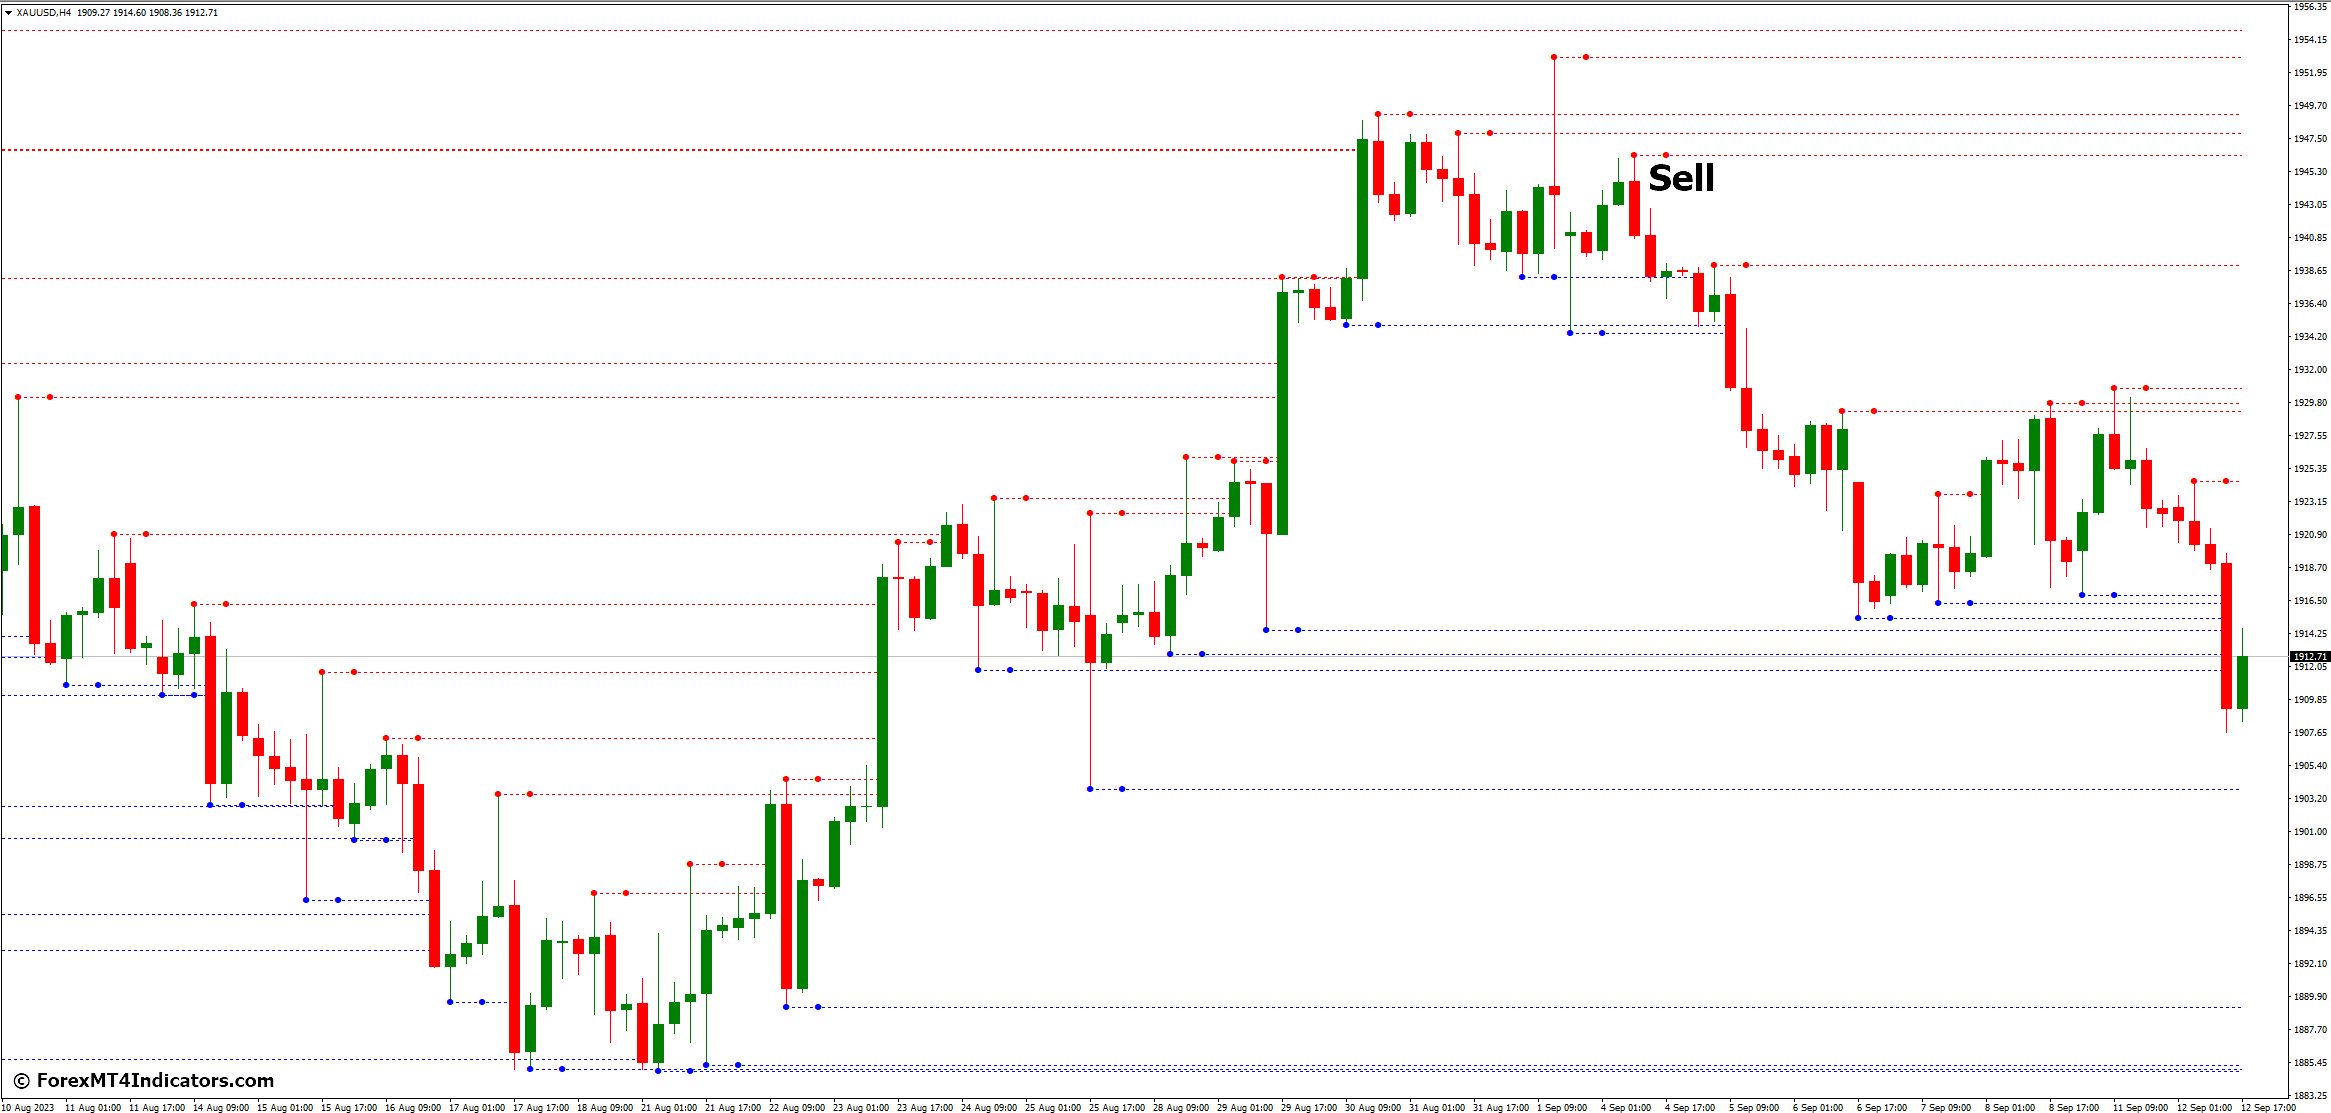 How to Trade with MTF Fractal MT4 Indicator - Sell Entry